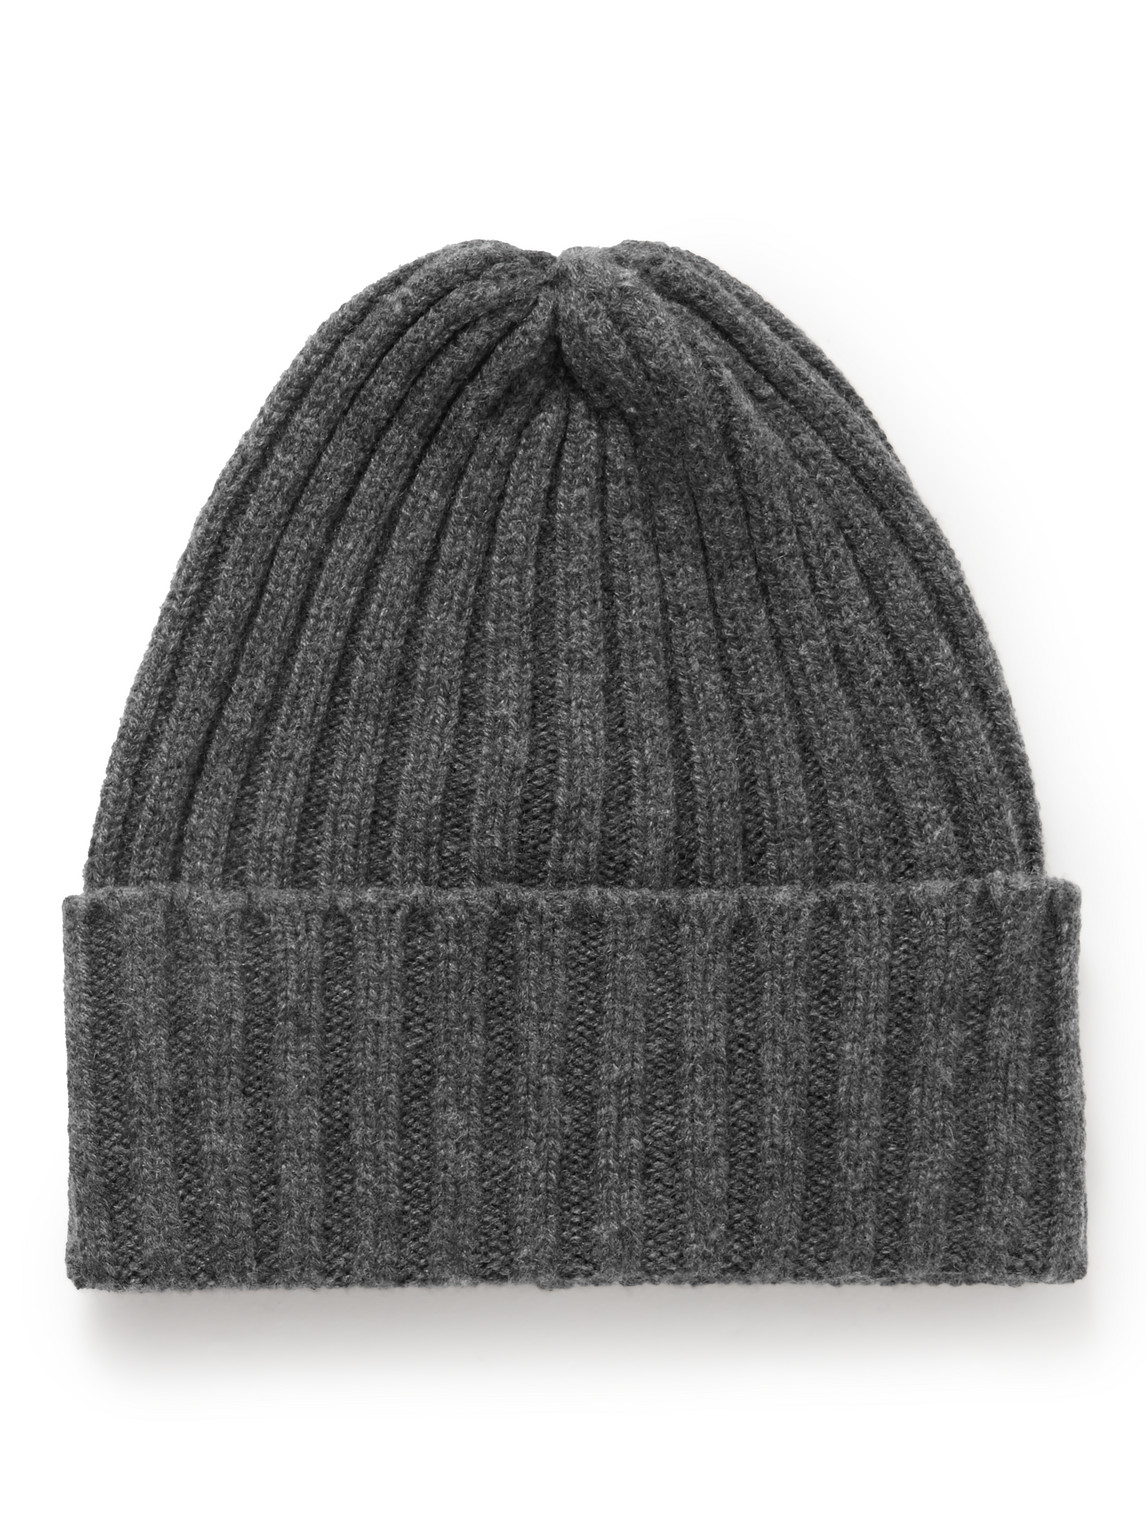 Thom Sweeney Ribbed Cashmere Beanie In Gray